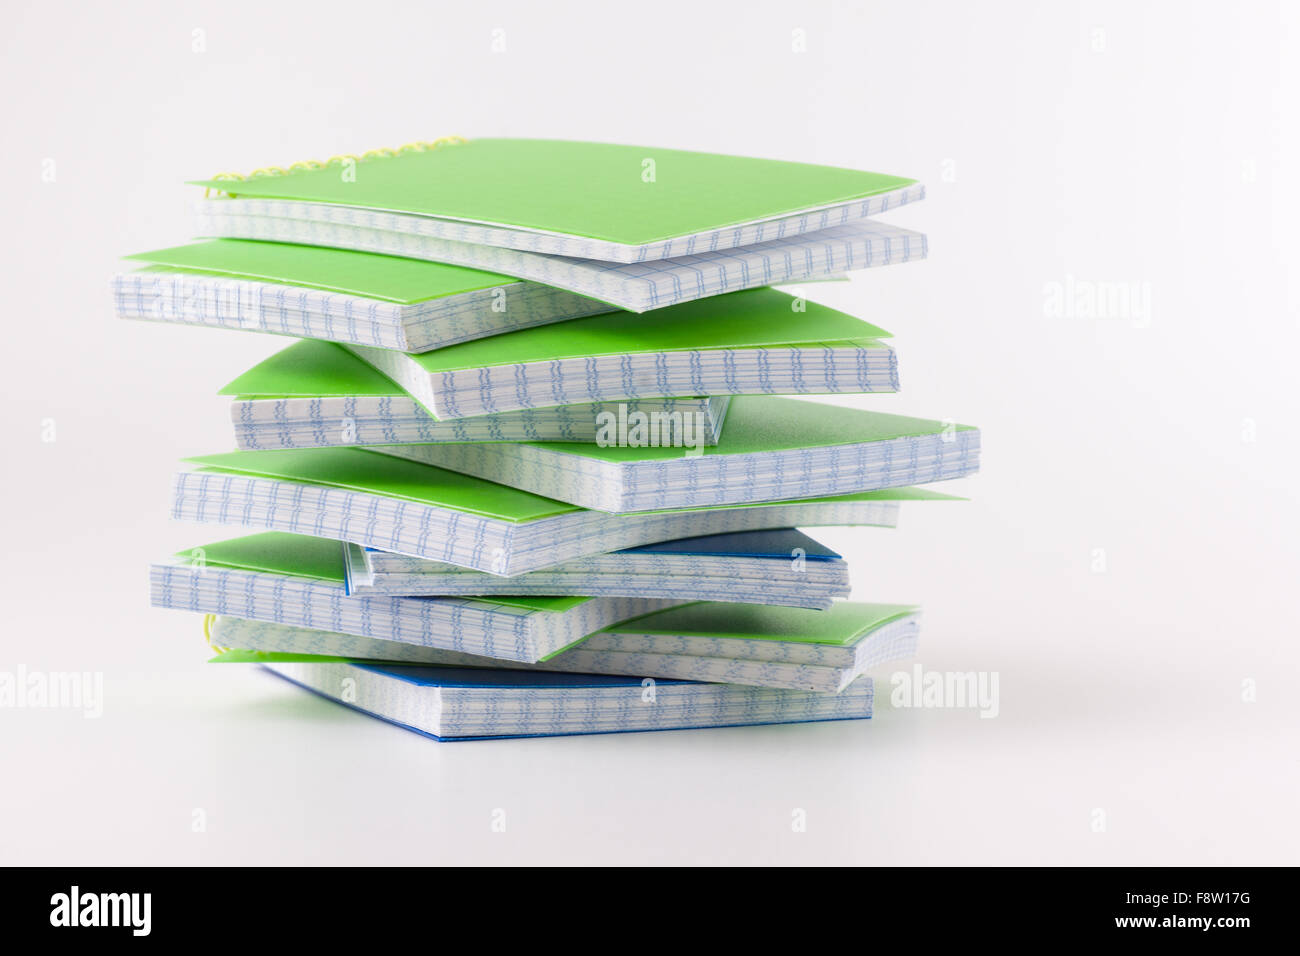 the pile of green notepads lies on a white background Stock Photo